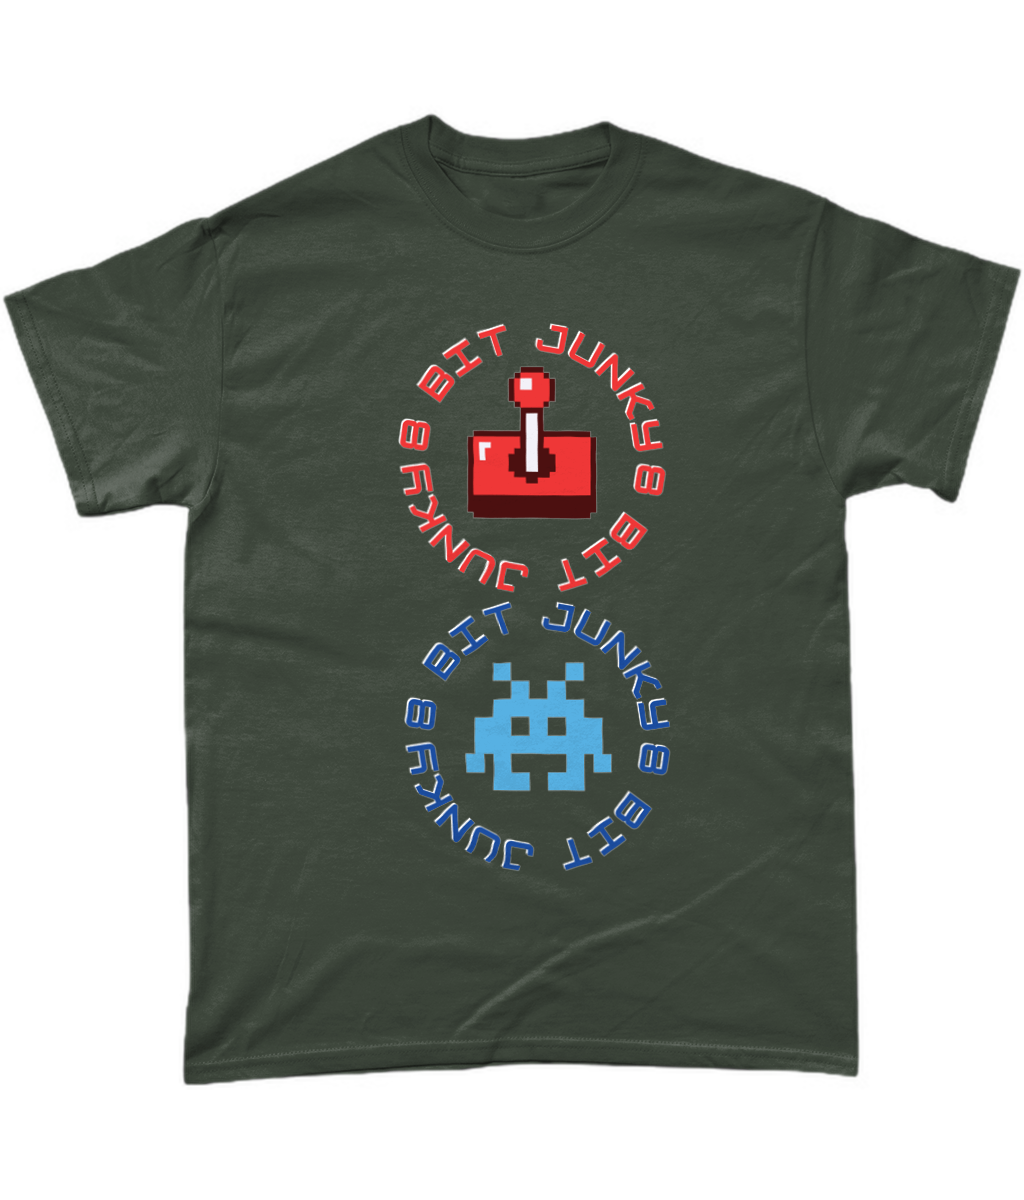 Green T-Shirt with words 8-bit junky in 2 circles making a figure 8 with an invader in one circle and joystick in the other